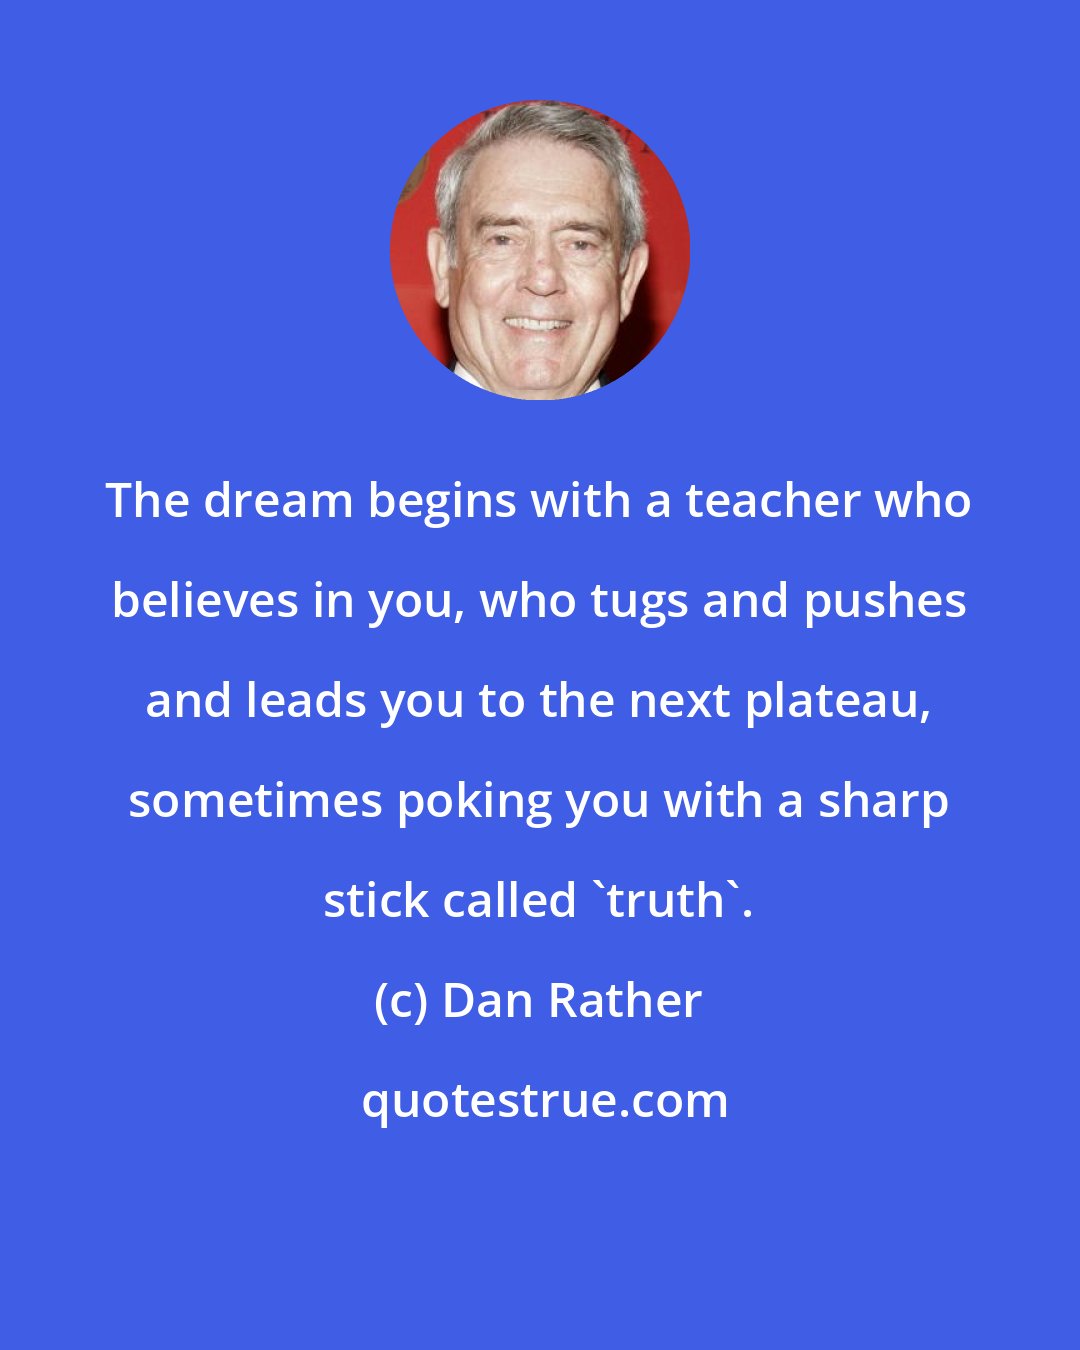 Dan Rather: The dream begins with a teacher who believes in you, who tugs and pushes and leads you to the next plateau, sometimes poking you with a sharp stick called 'truth'.